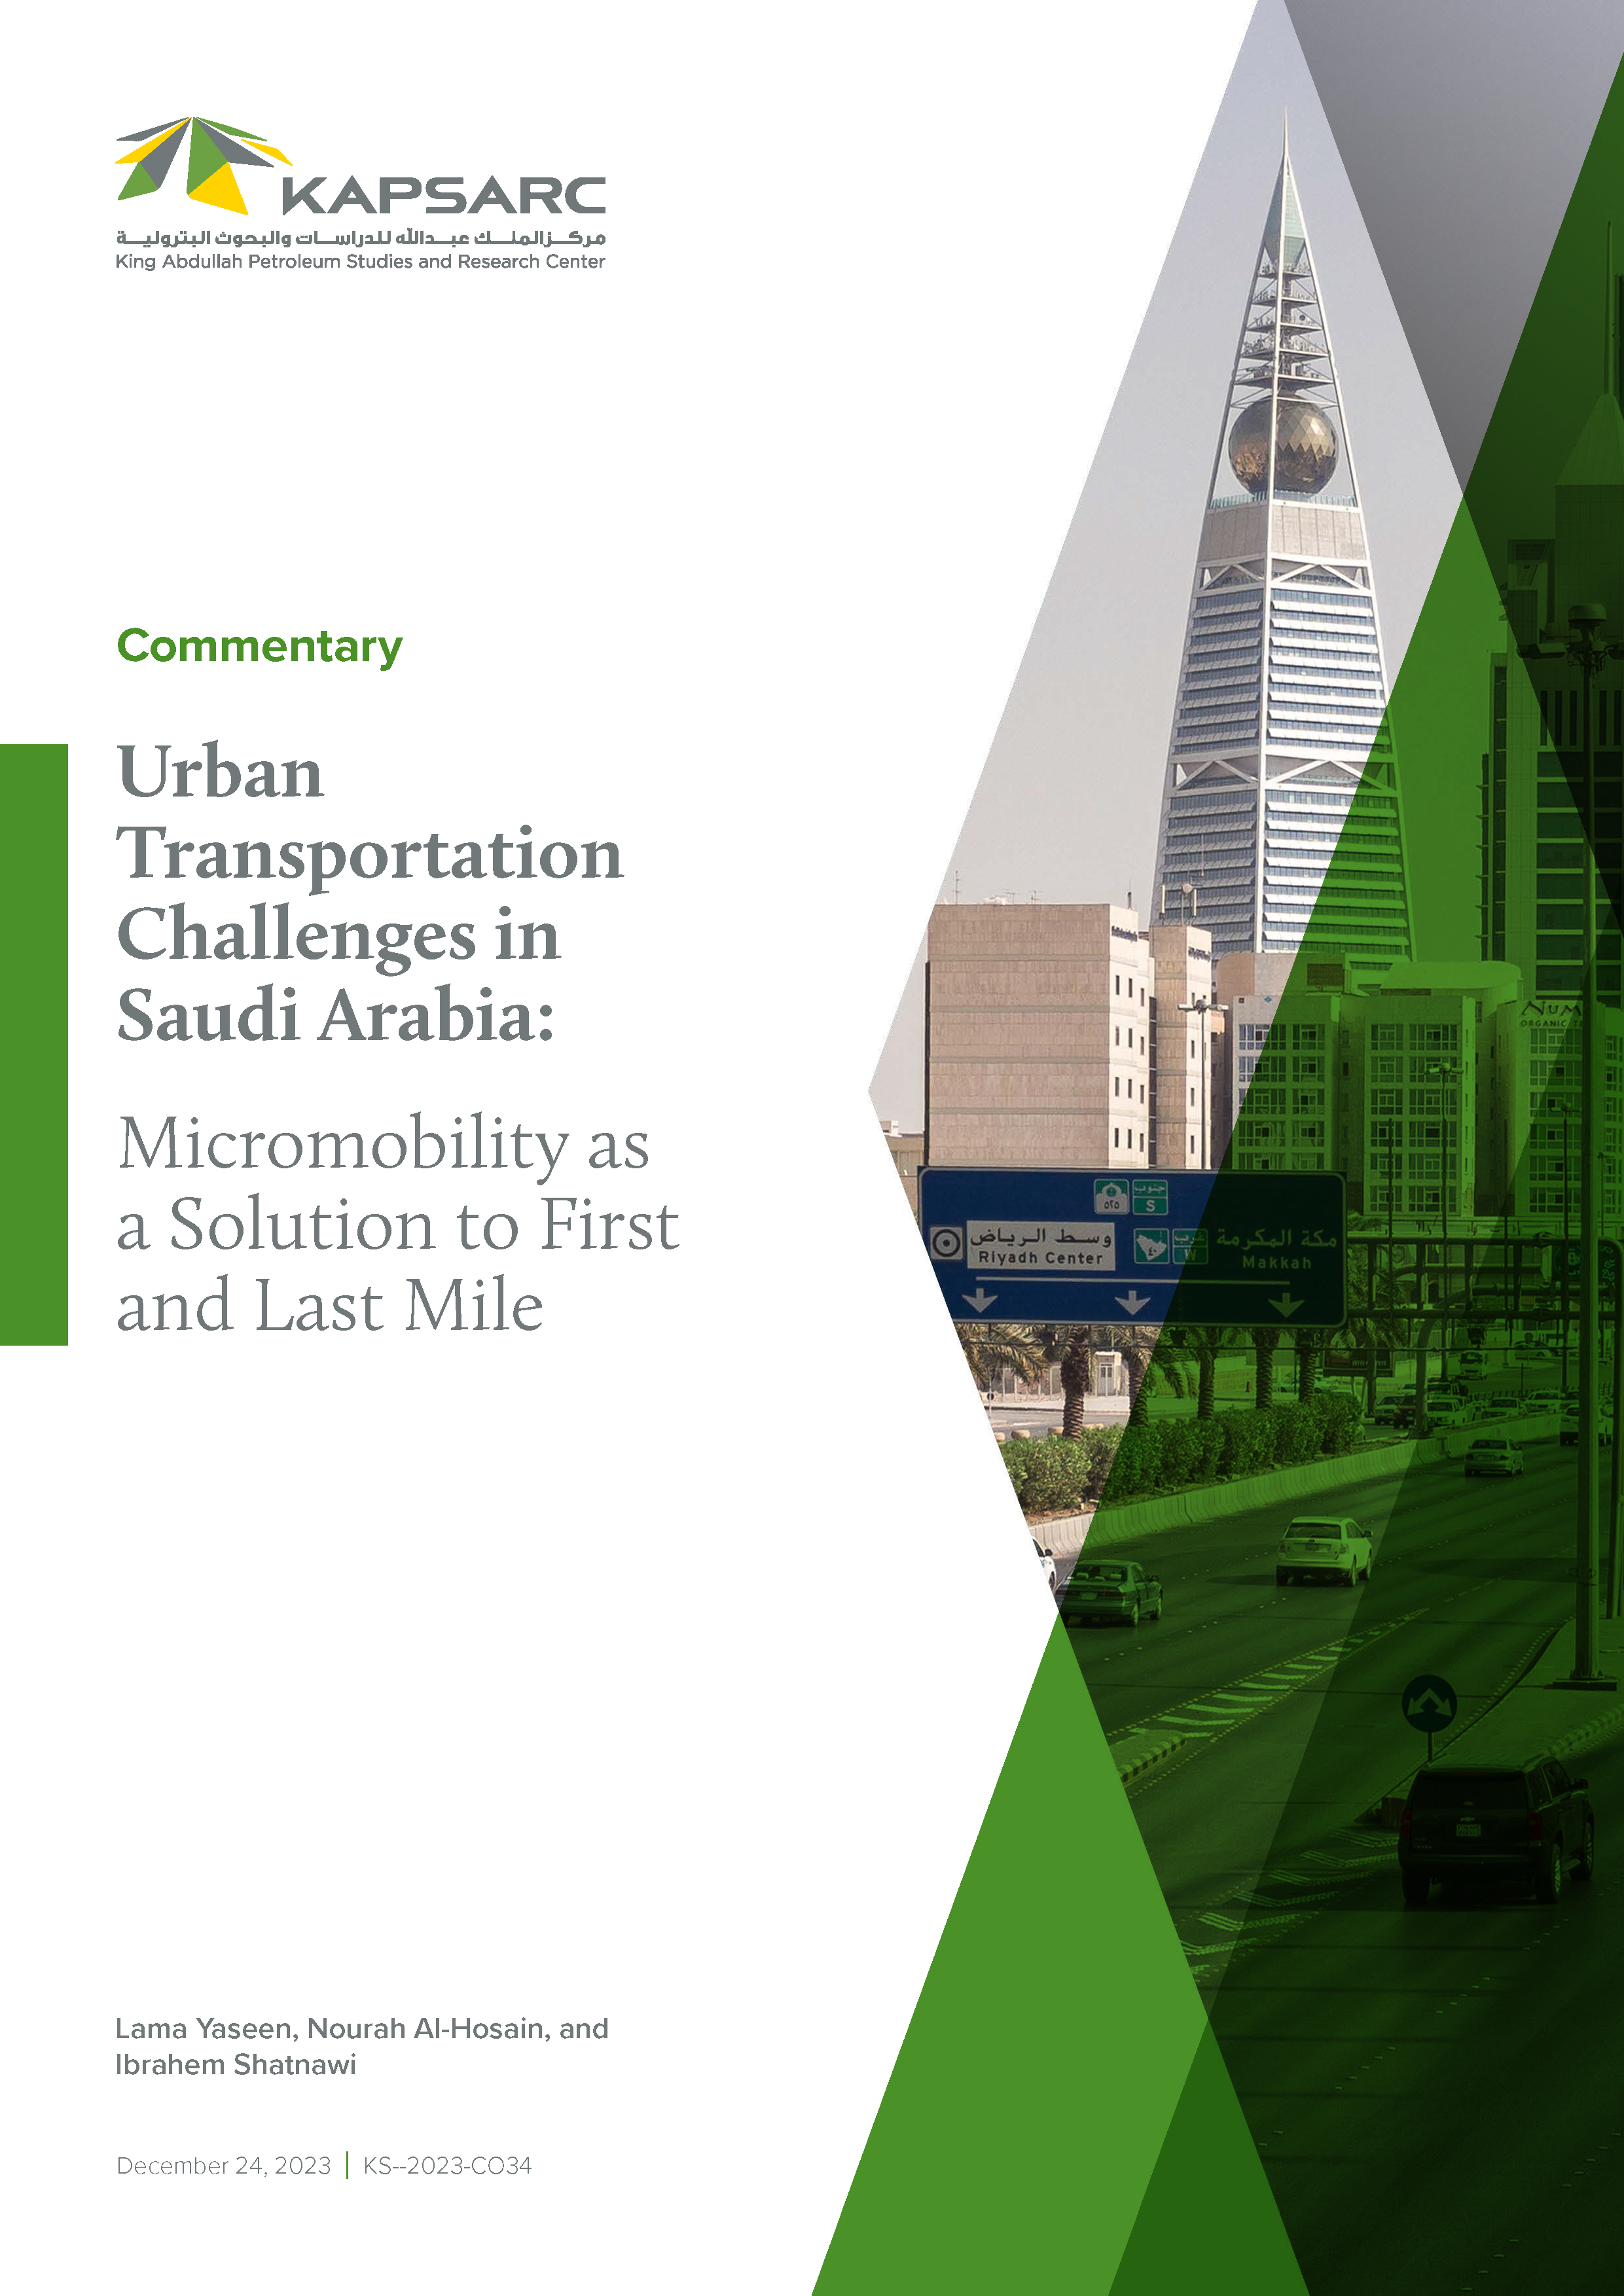 Urban Transportation Challenges in Saudi Arabia: Micromobility as a Solution to First and Last Mile